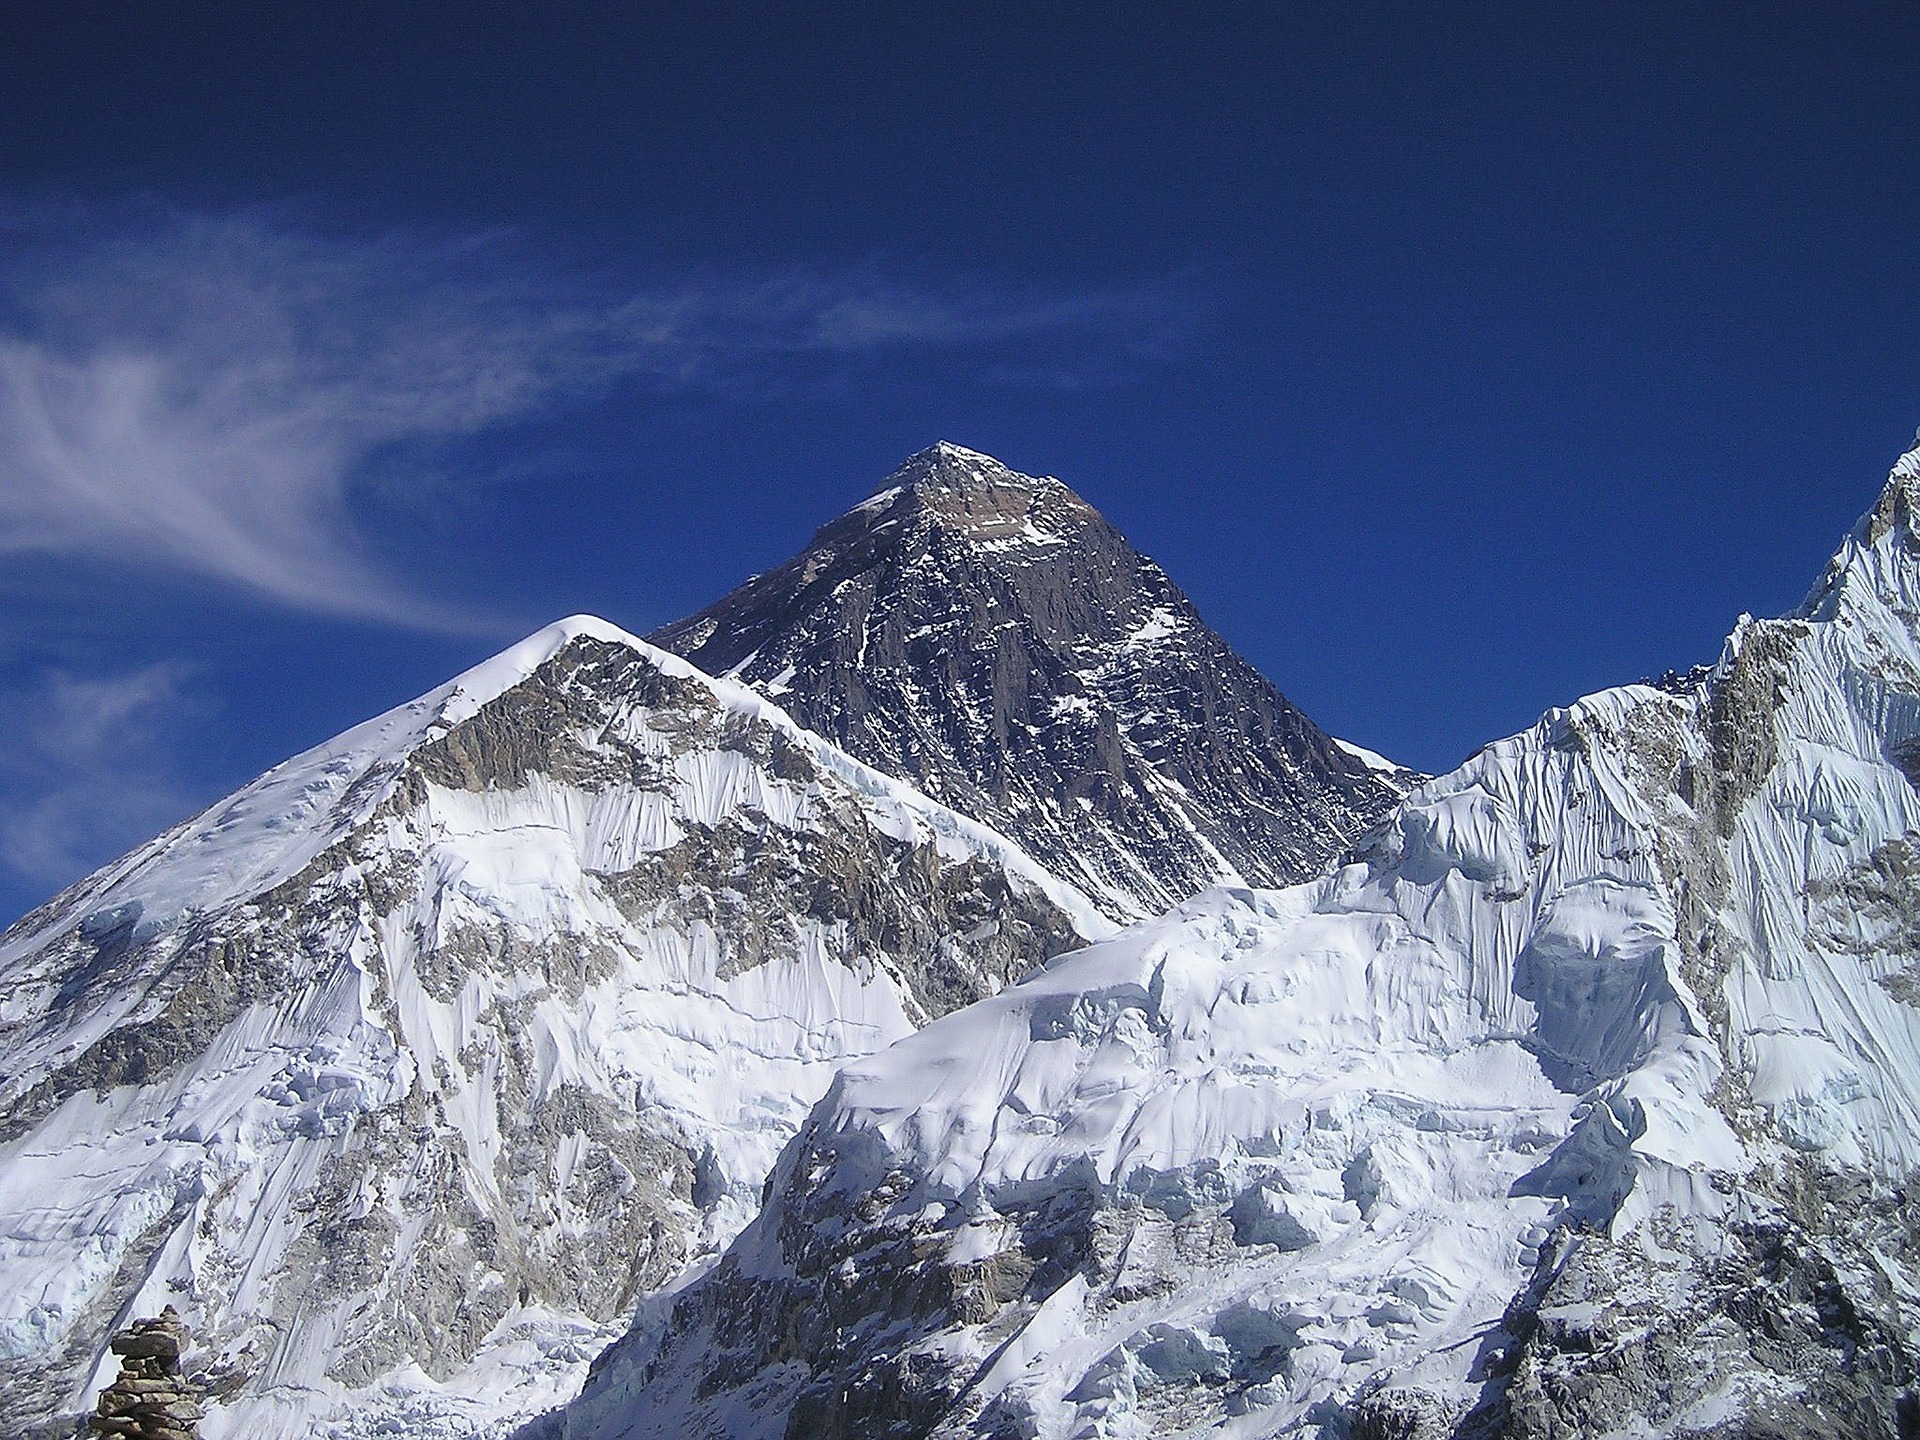 Example of sublimation on Mt. Everest.